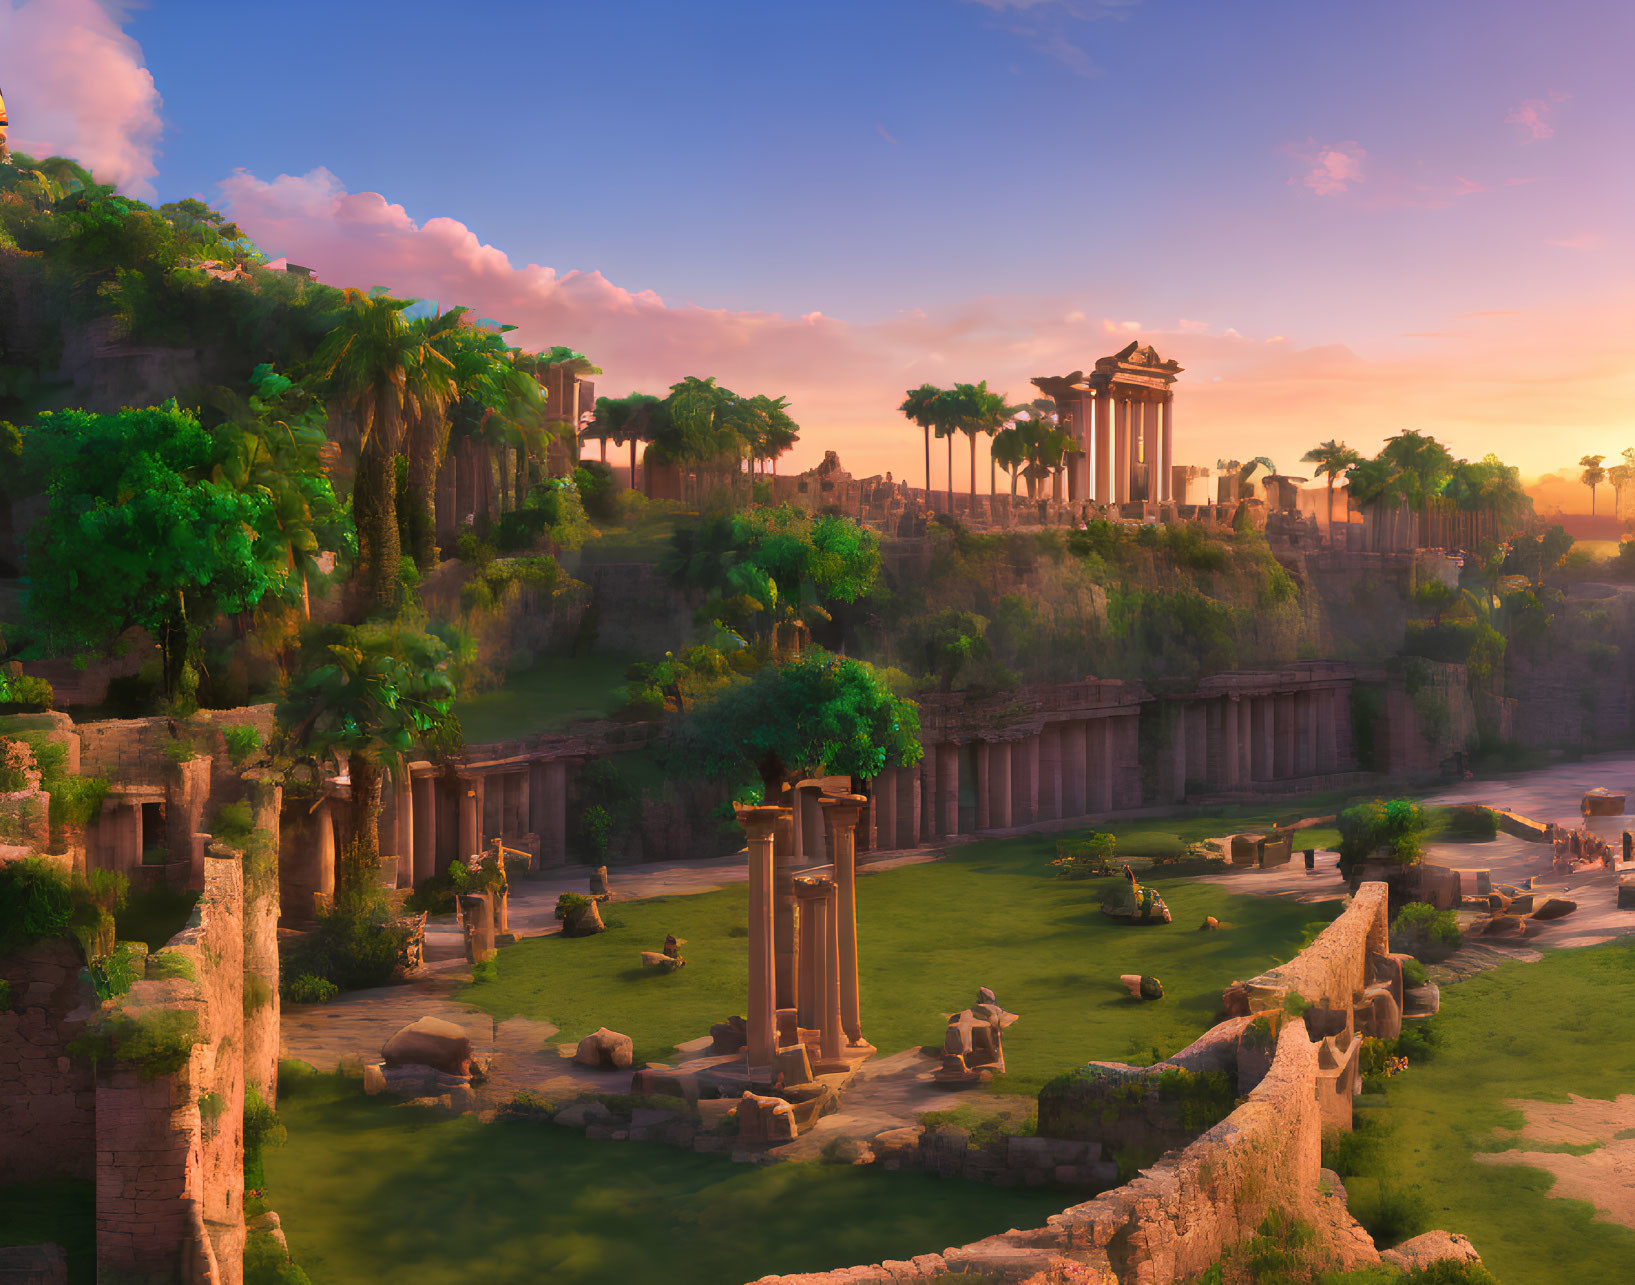 Ancient ruin with towering columns in lush greenery at sunset